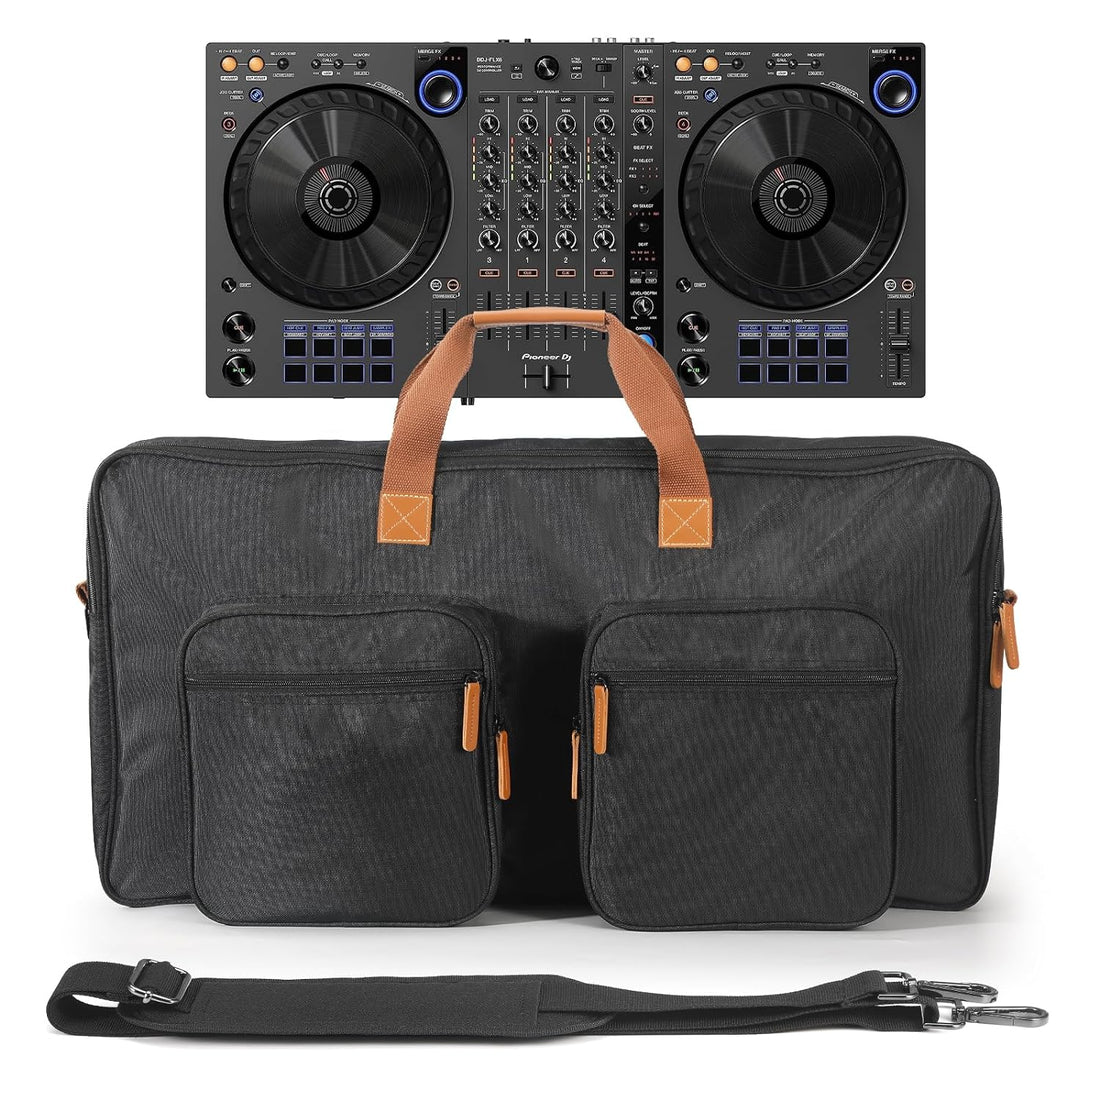 OUKNAK Protector Bag Storage Case, Tote Bag for Pioneer DJ DDJ-FLX6, Travel Carrying Case for Pioneer DJ DDJ-FLX6-GT or DDJ-800, Compact DJ Controller Padded Carry Case